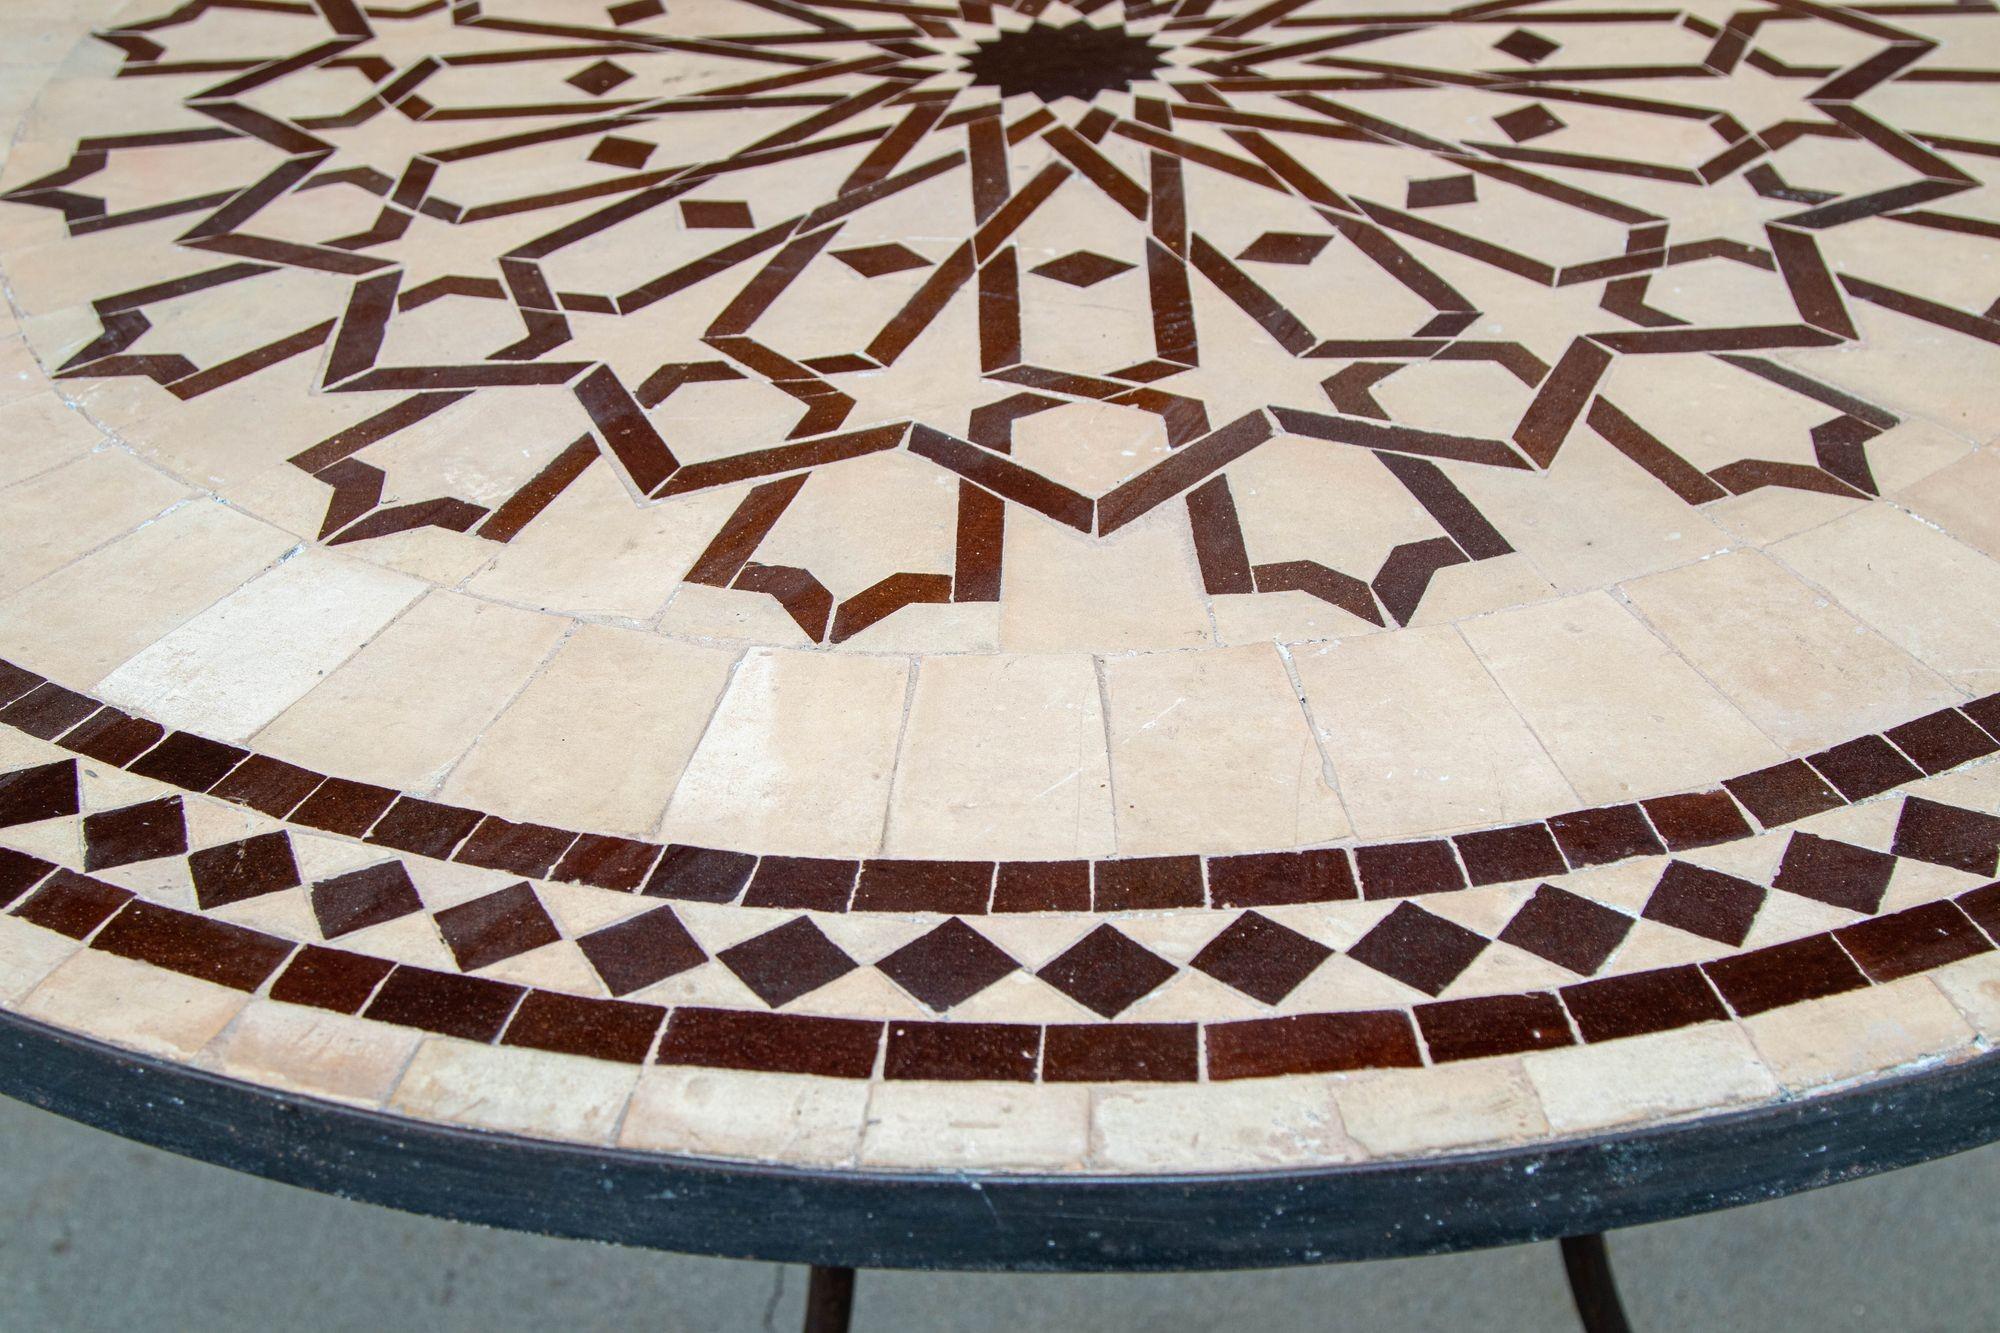 20th Century Moroccan Round Mosaic Outdoor Tile Table with Iron Base